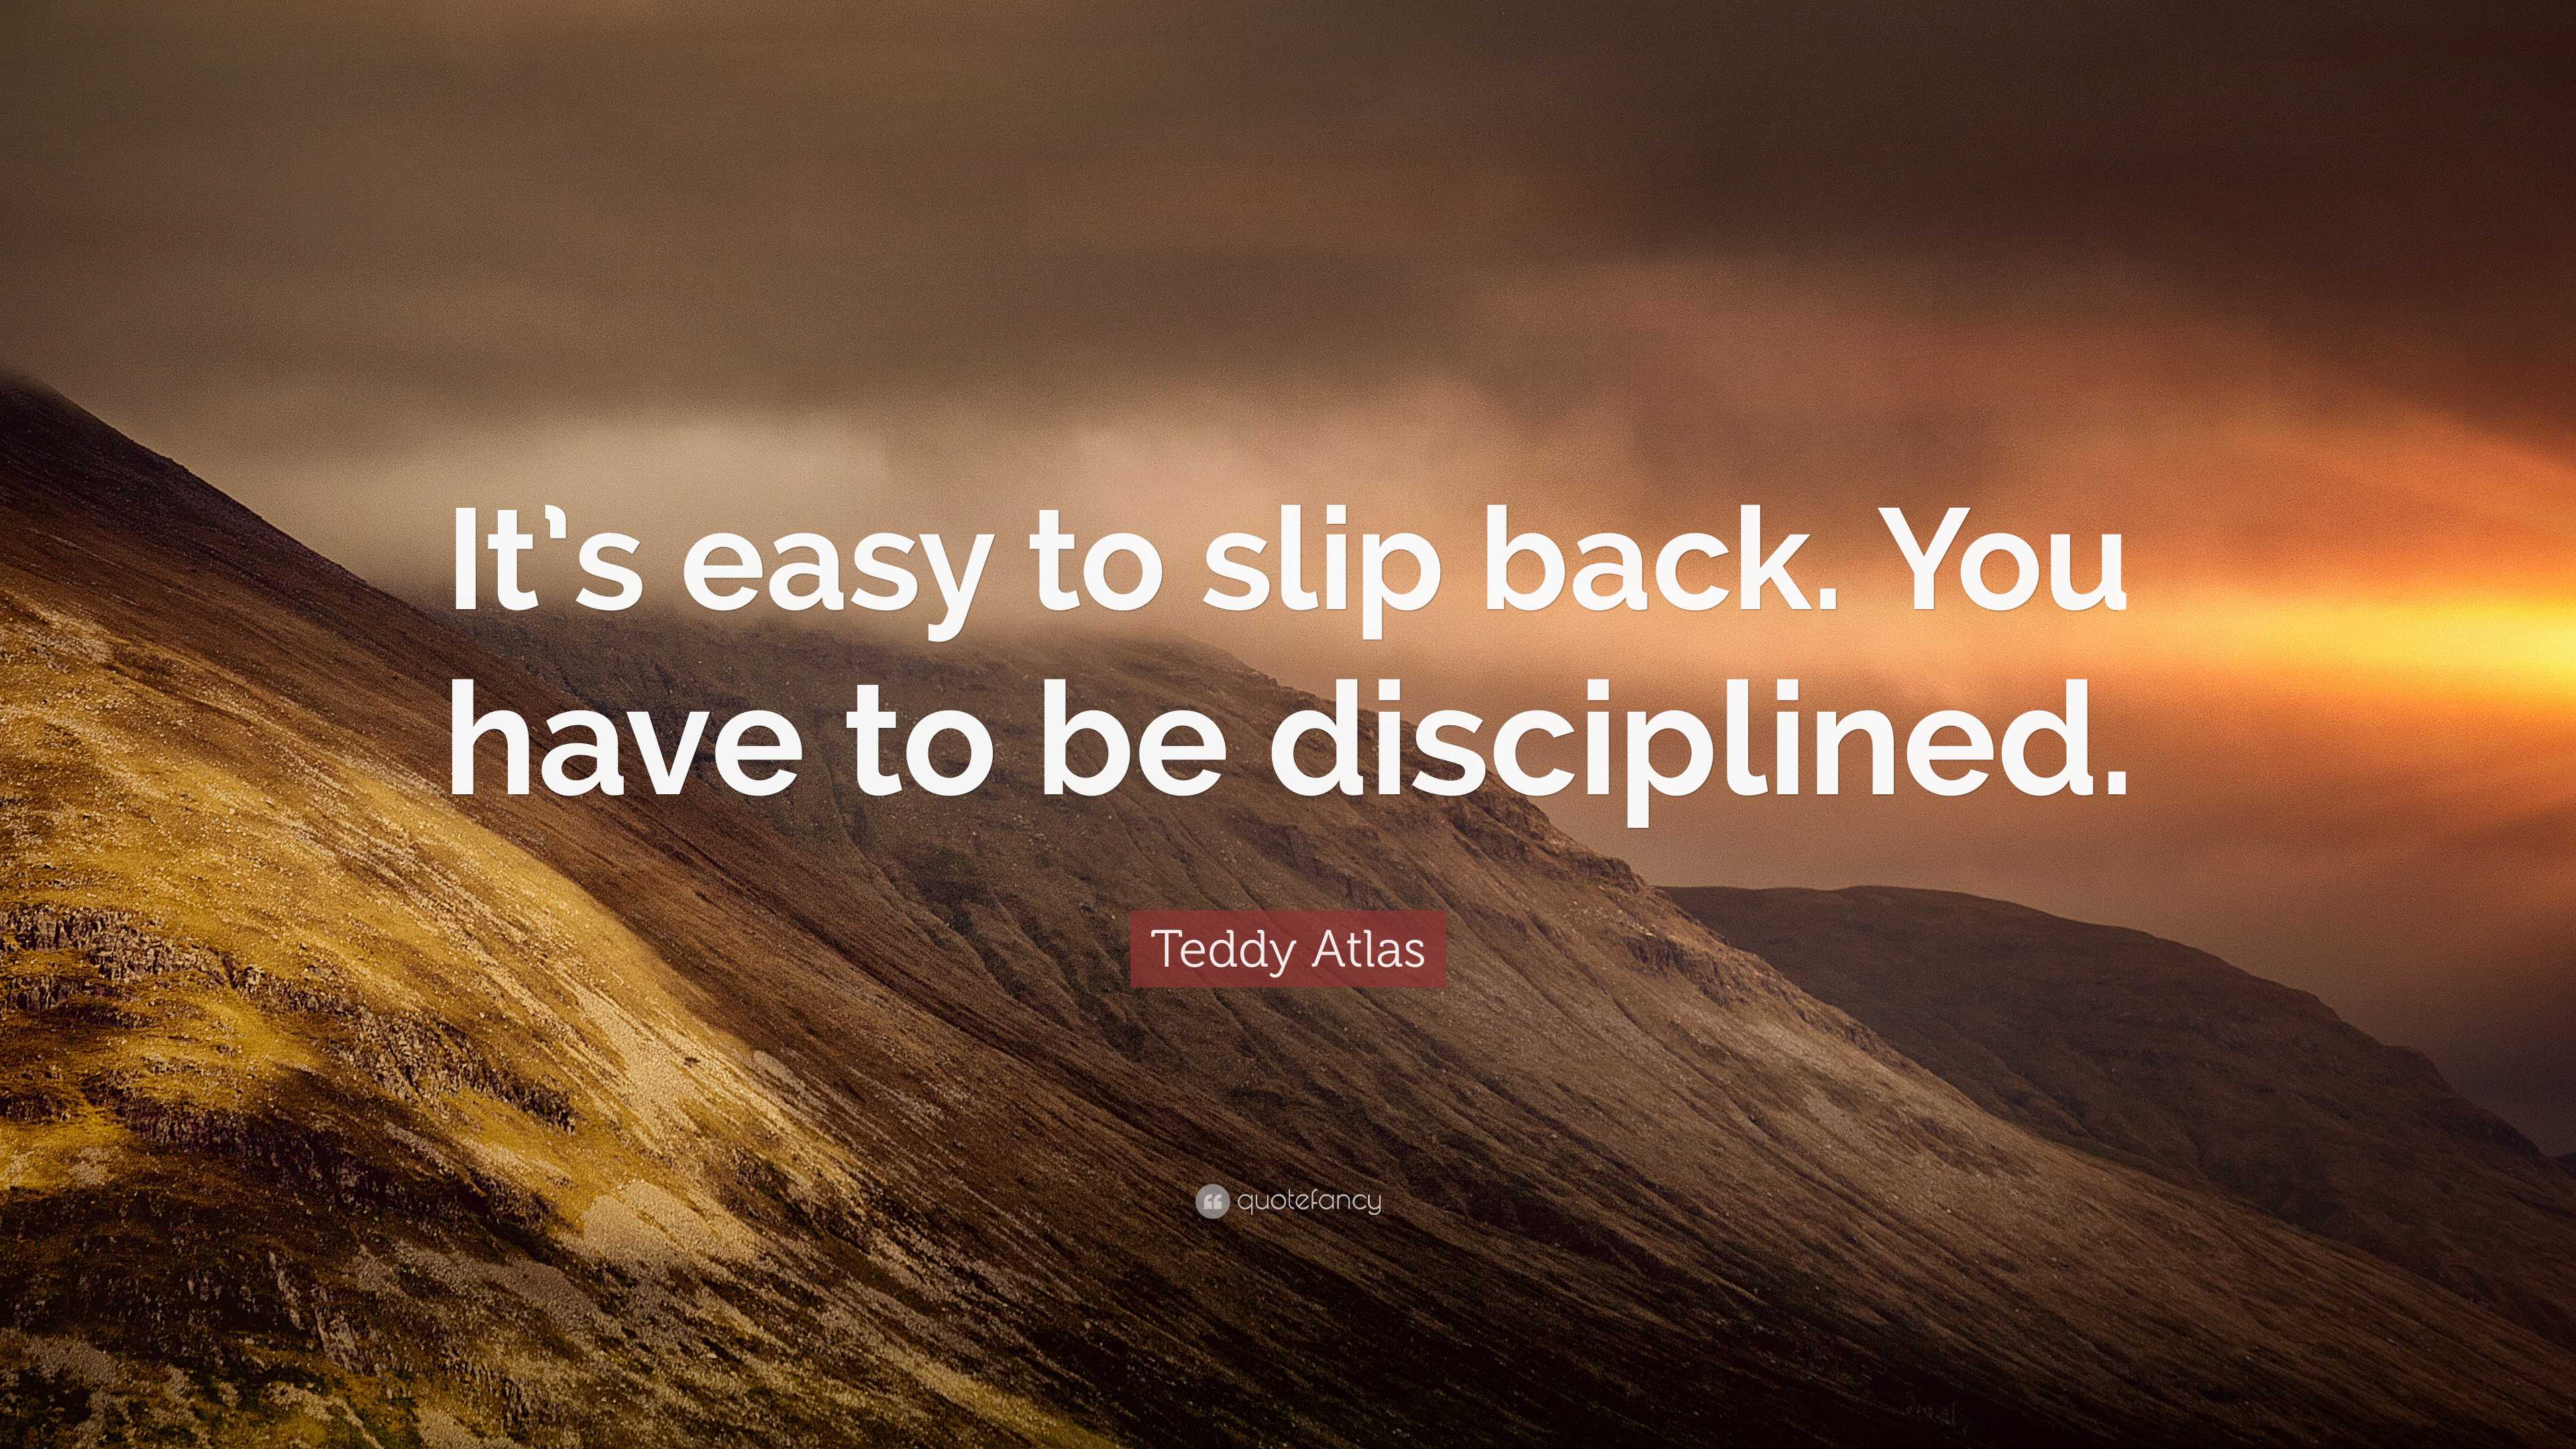 Teddy Atlas Quote: “It's easy to slip back. You have to be